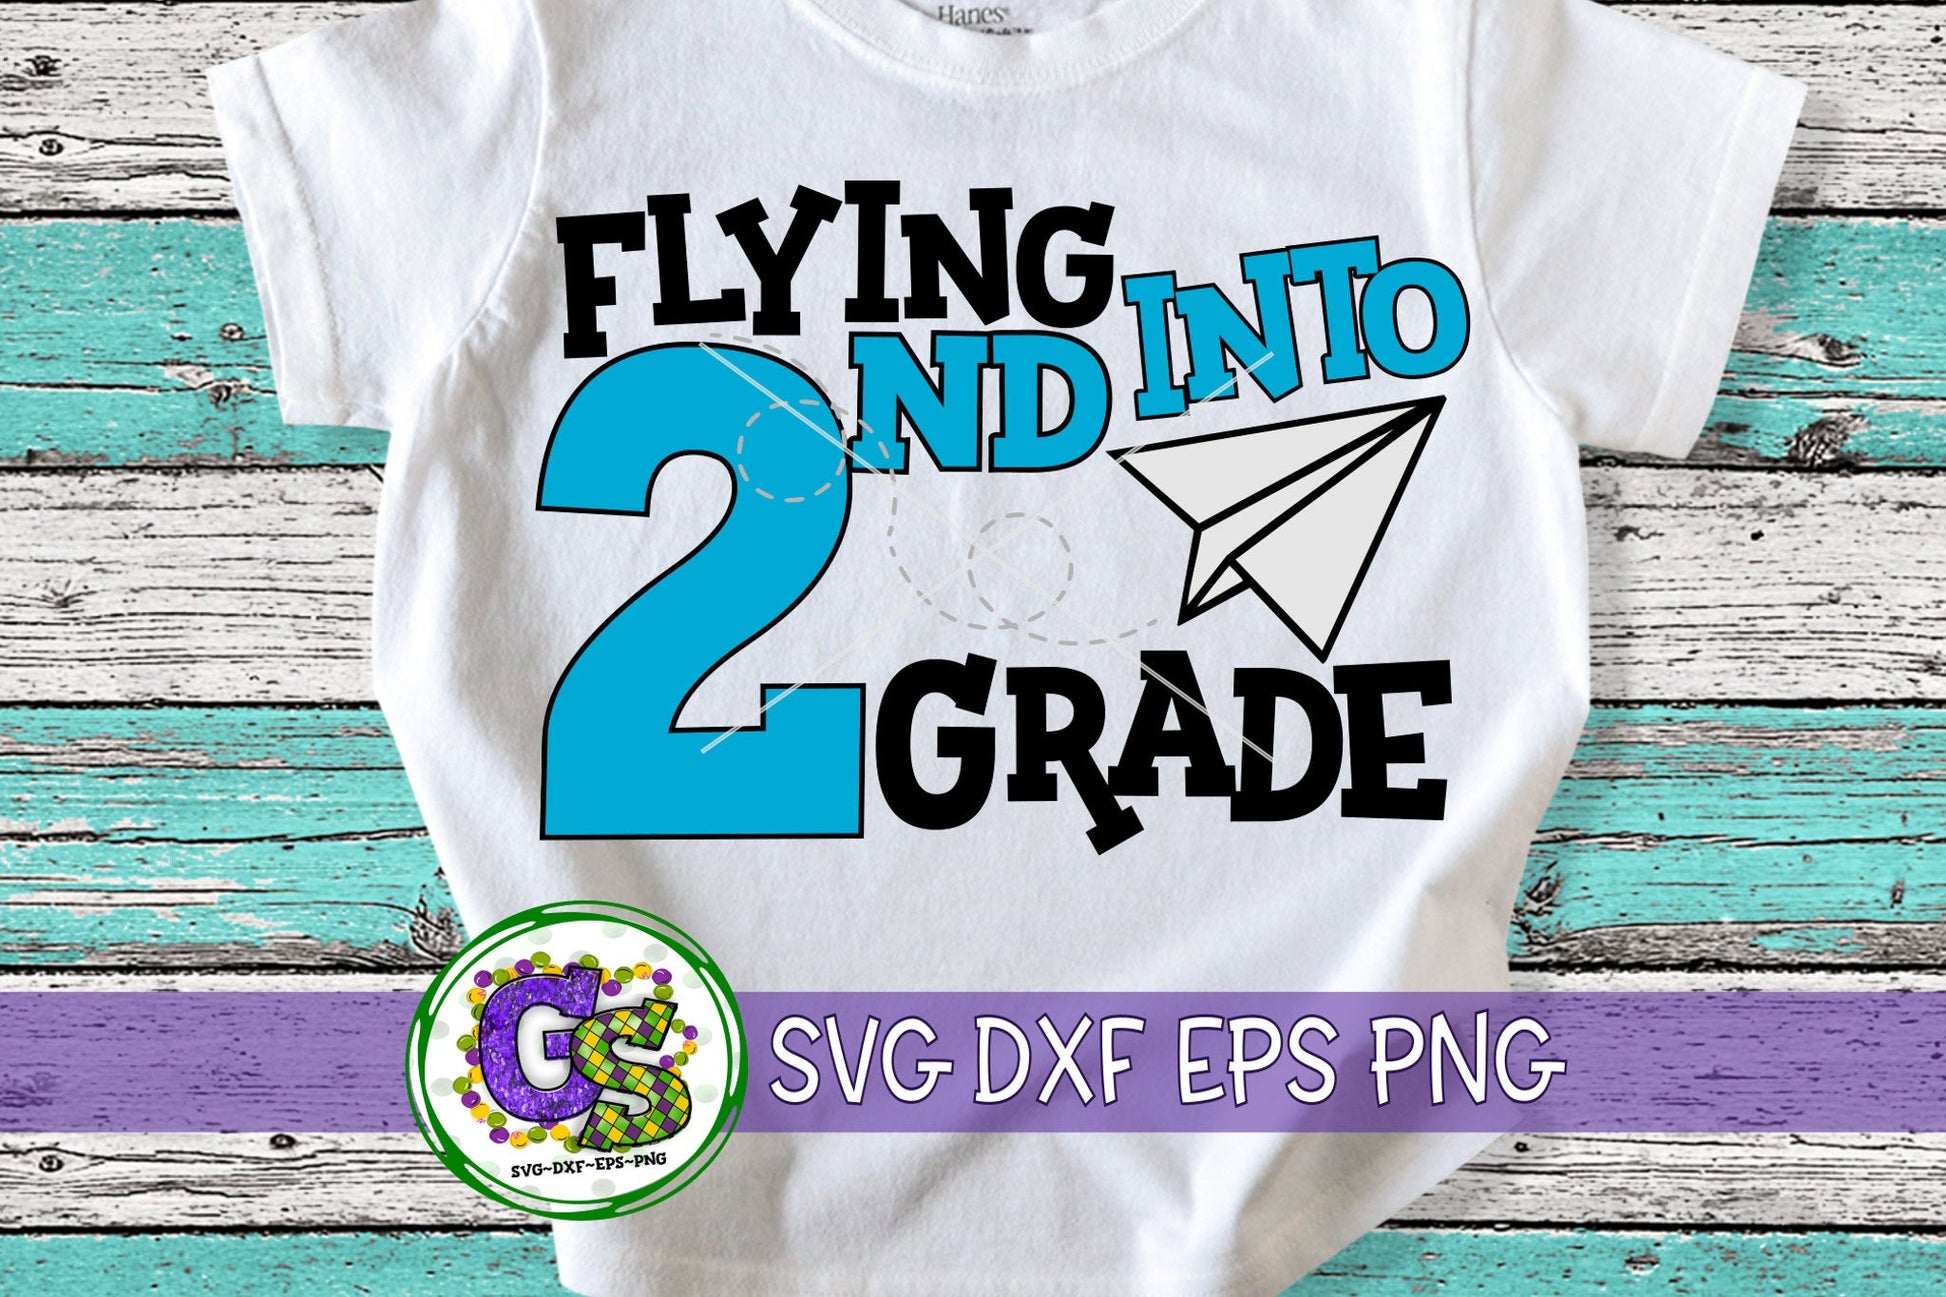 Flying Into 2nd Grade svg dxf eps png 2nd Grade SvG | Back To School | School SVG | 2nd Grade SvG | Second grade | Instant Download Cut File